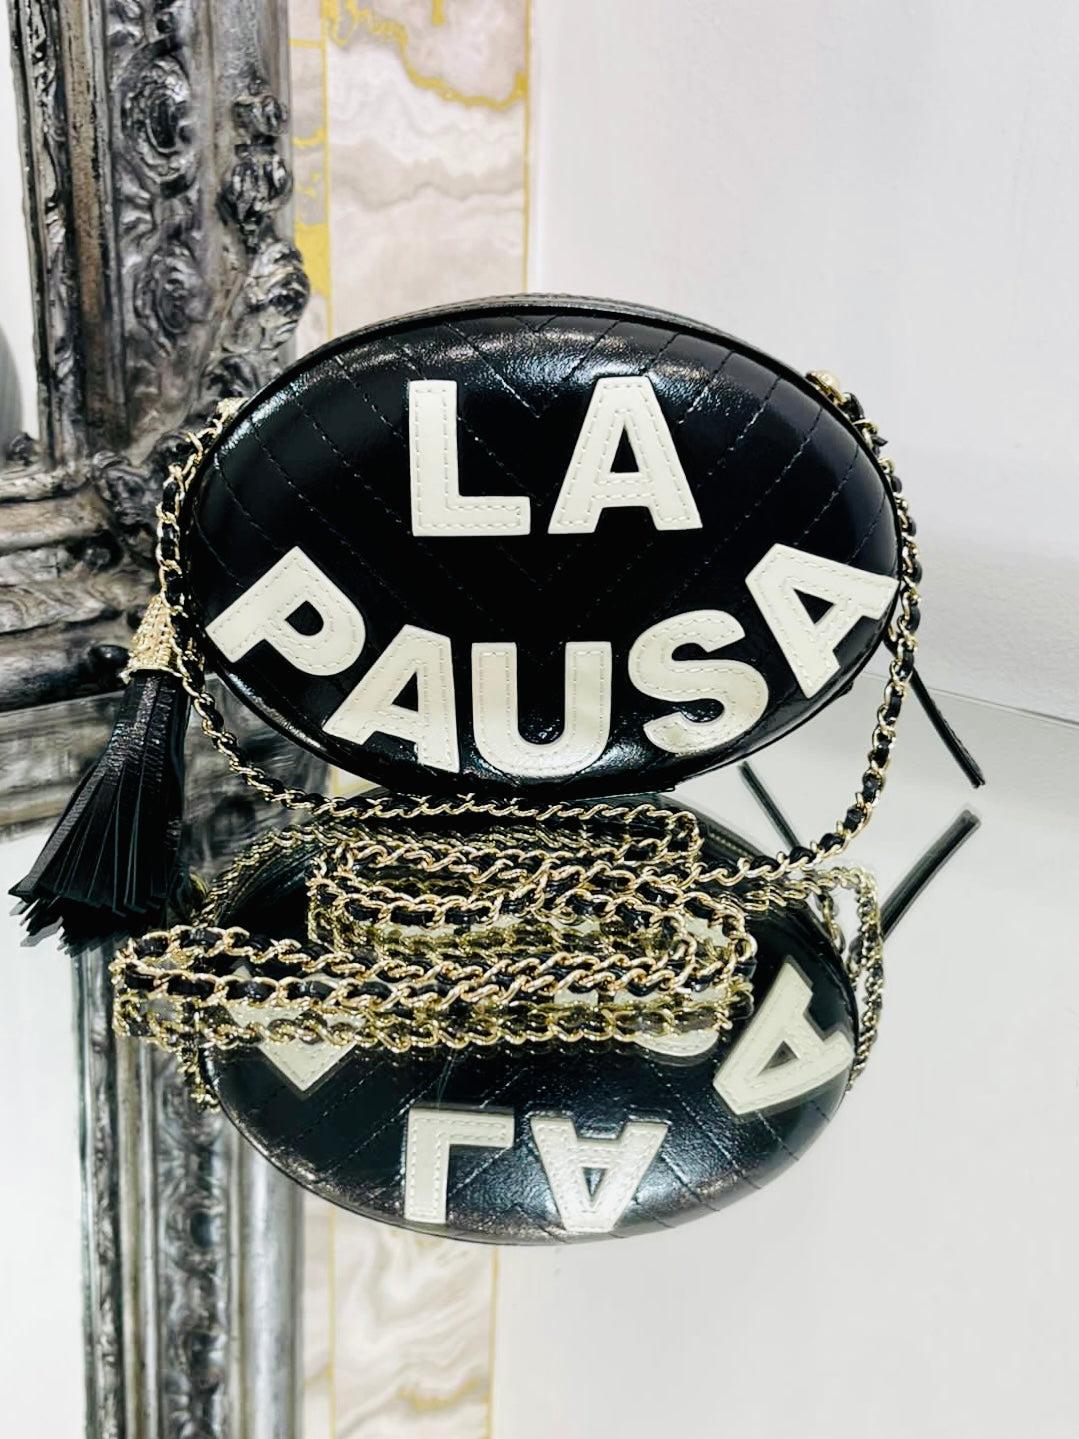 Chanel La Pausa Villa Leather Bag

Oval hard case bag in black chevron Lambskin leather with contrasting white, stitched wording 'LA PAUSA'. 

Gold leather and chain shoulder/crossbody strap. Gold 'CC' capped logo leather tassel. Rare find in black